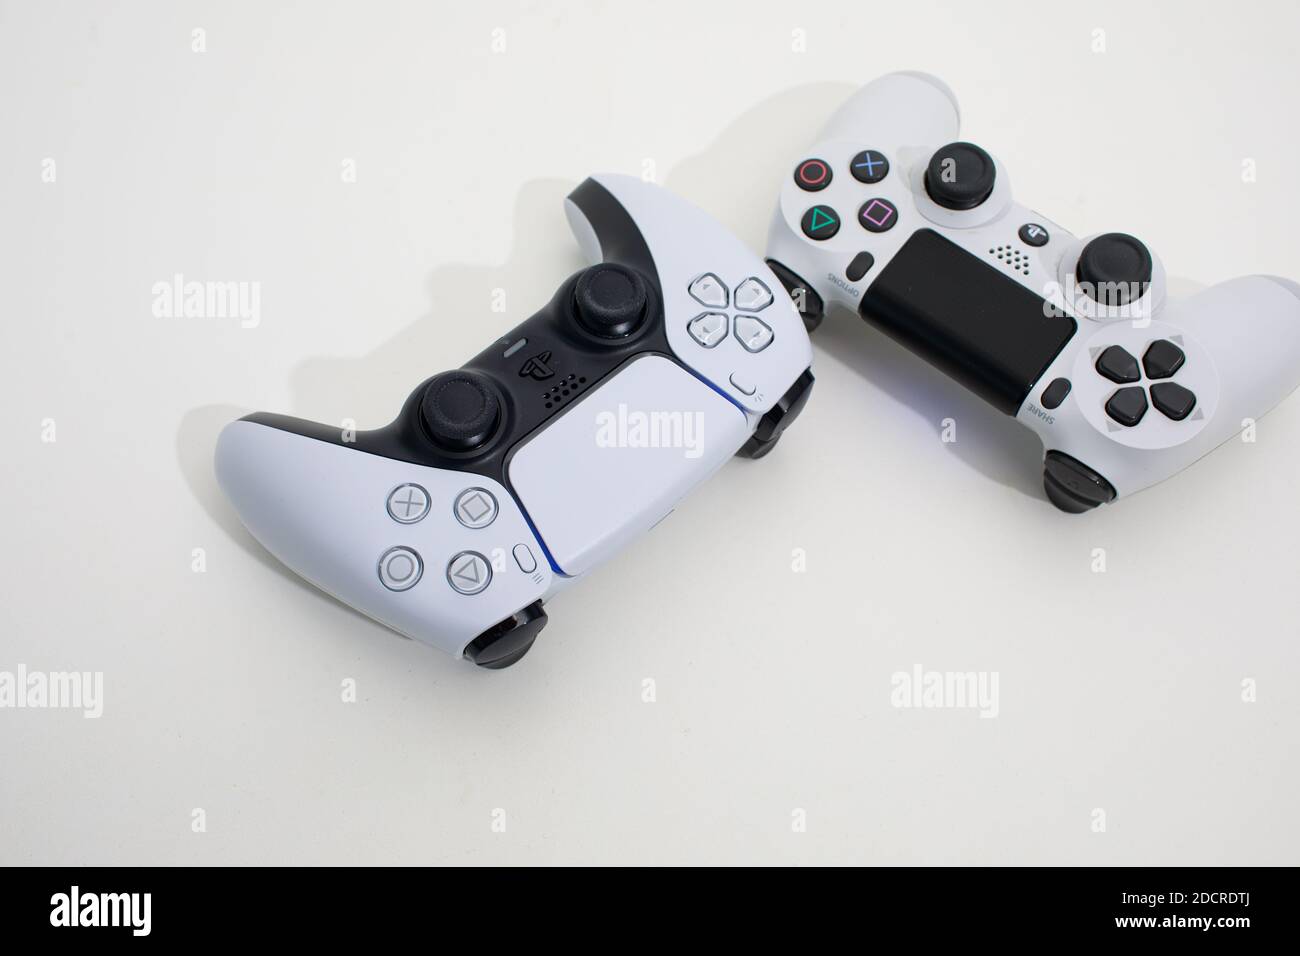 Sony Ps4 Games High Resolution Stock Photography and Images - Alamy